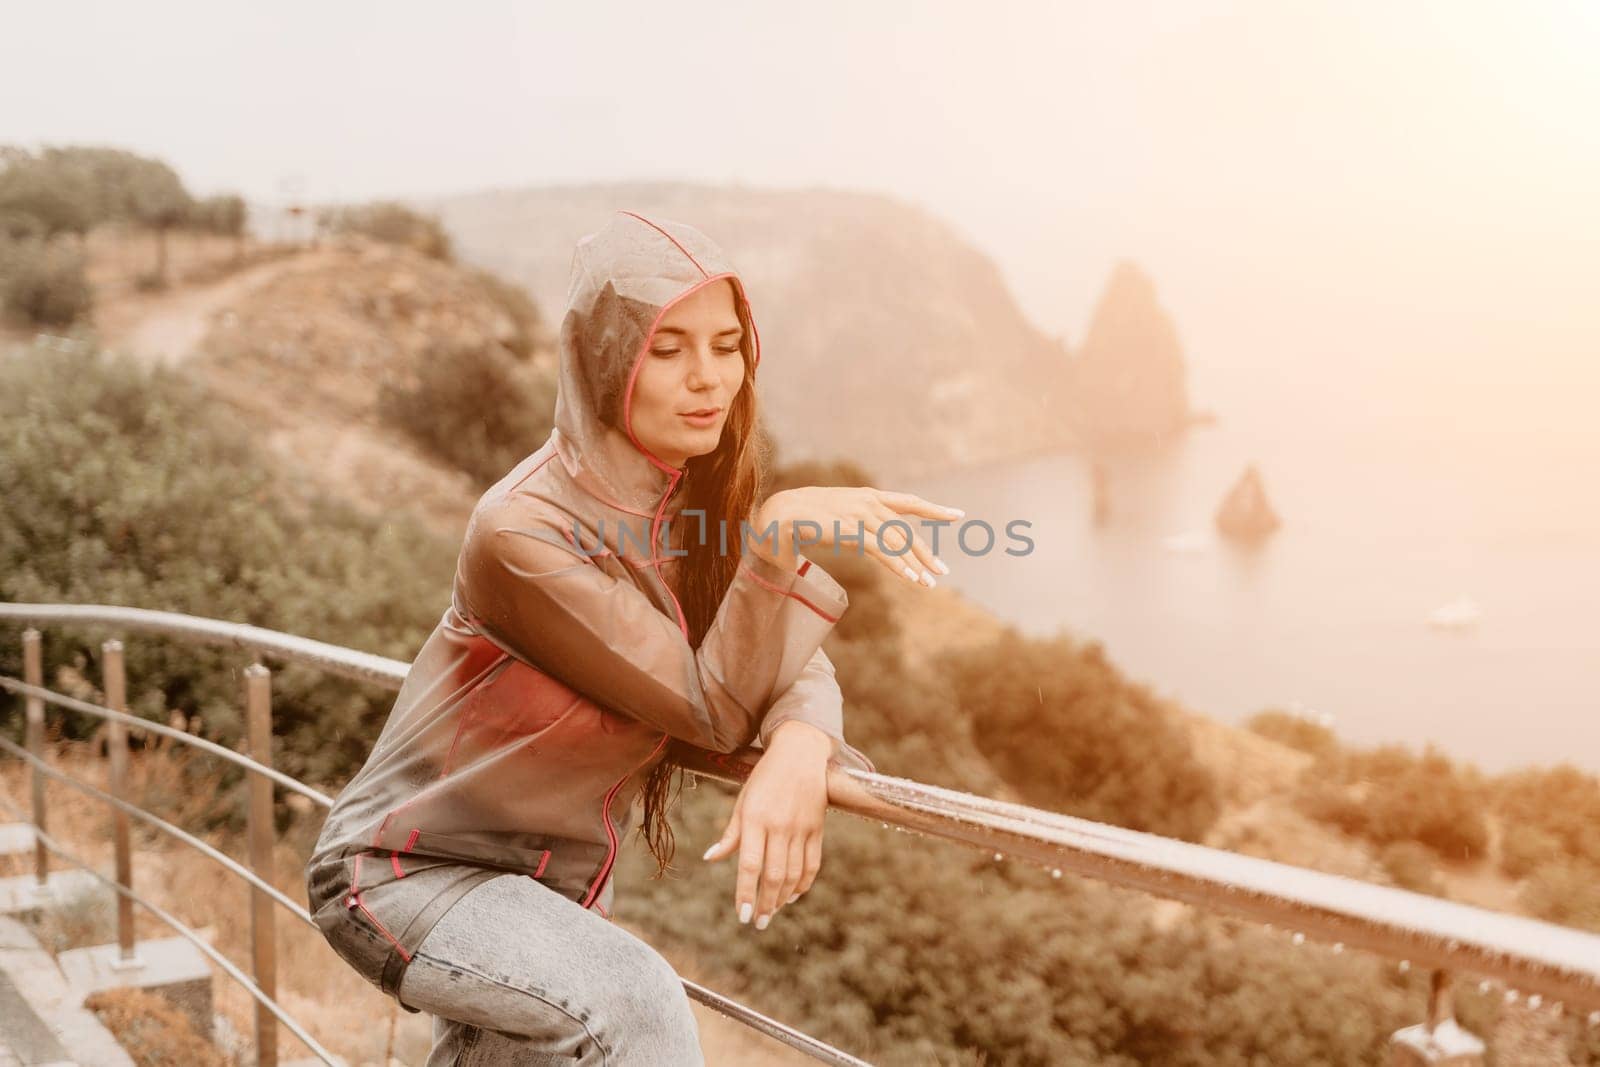 Woman rain umbrella. Happy woman portrait wearing a raincoat with transparent umbrella outdoors on rainy day in park near sea. Girl on the nature on rainy overcast day. by panophotograph